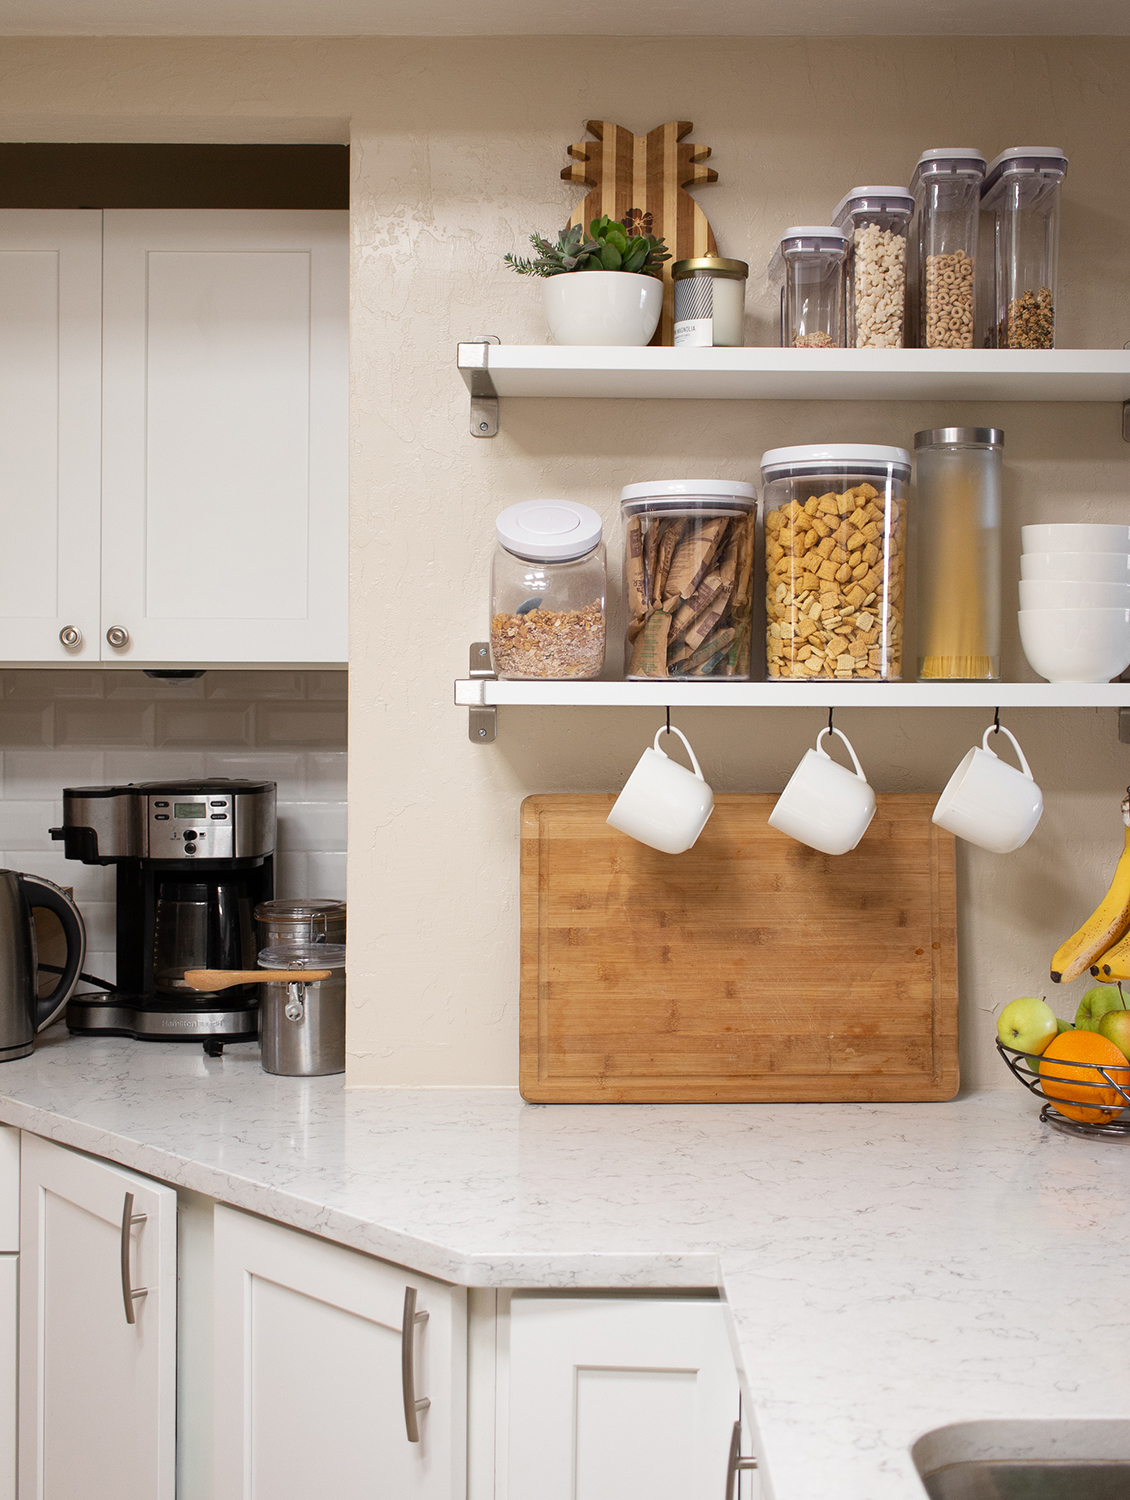 Before and After: How Organizing My Friend’s Kitchen Changed Her Life and Marriage